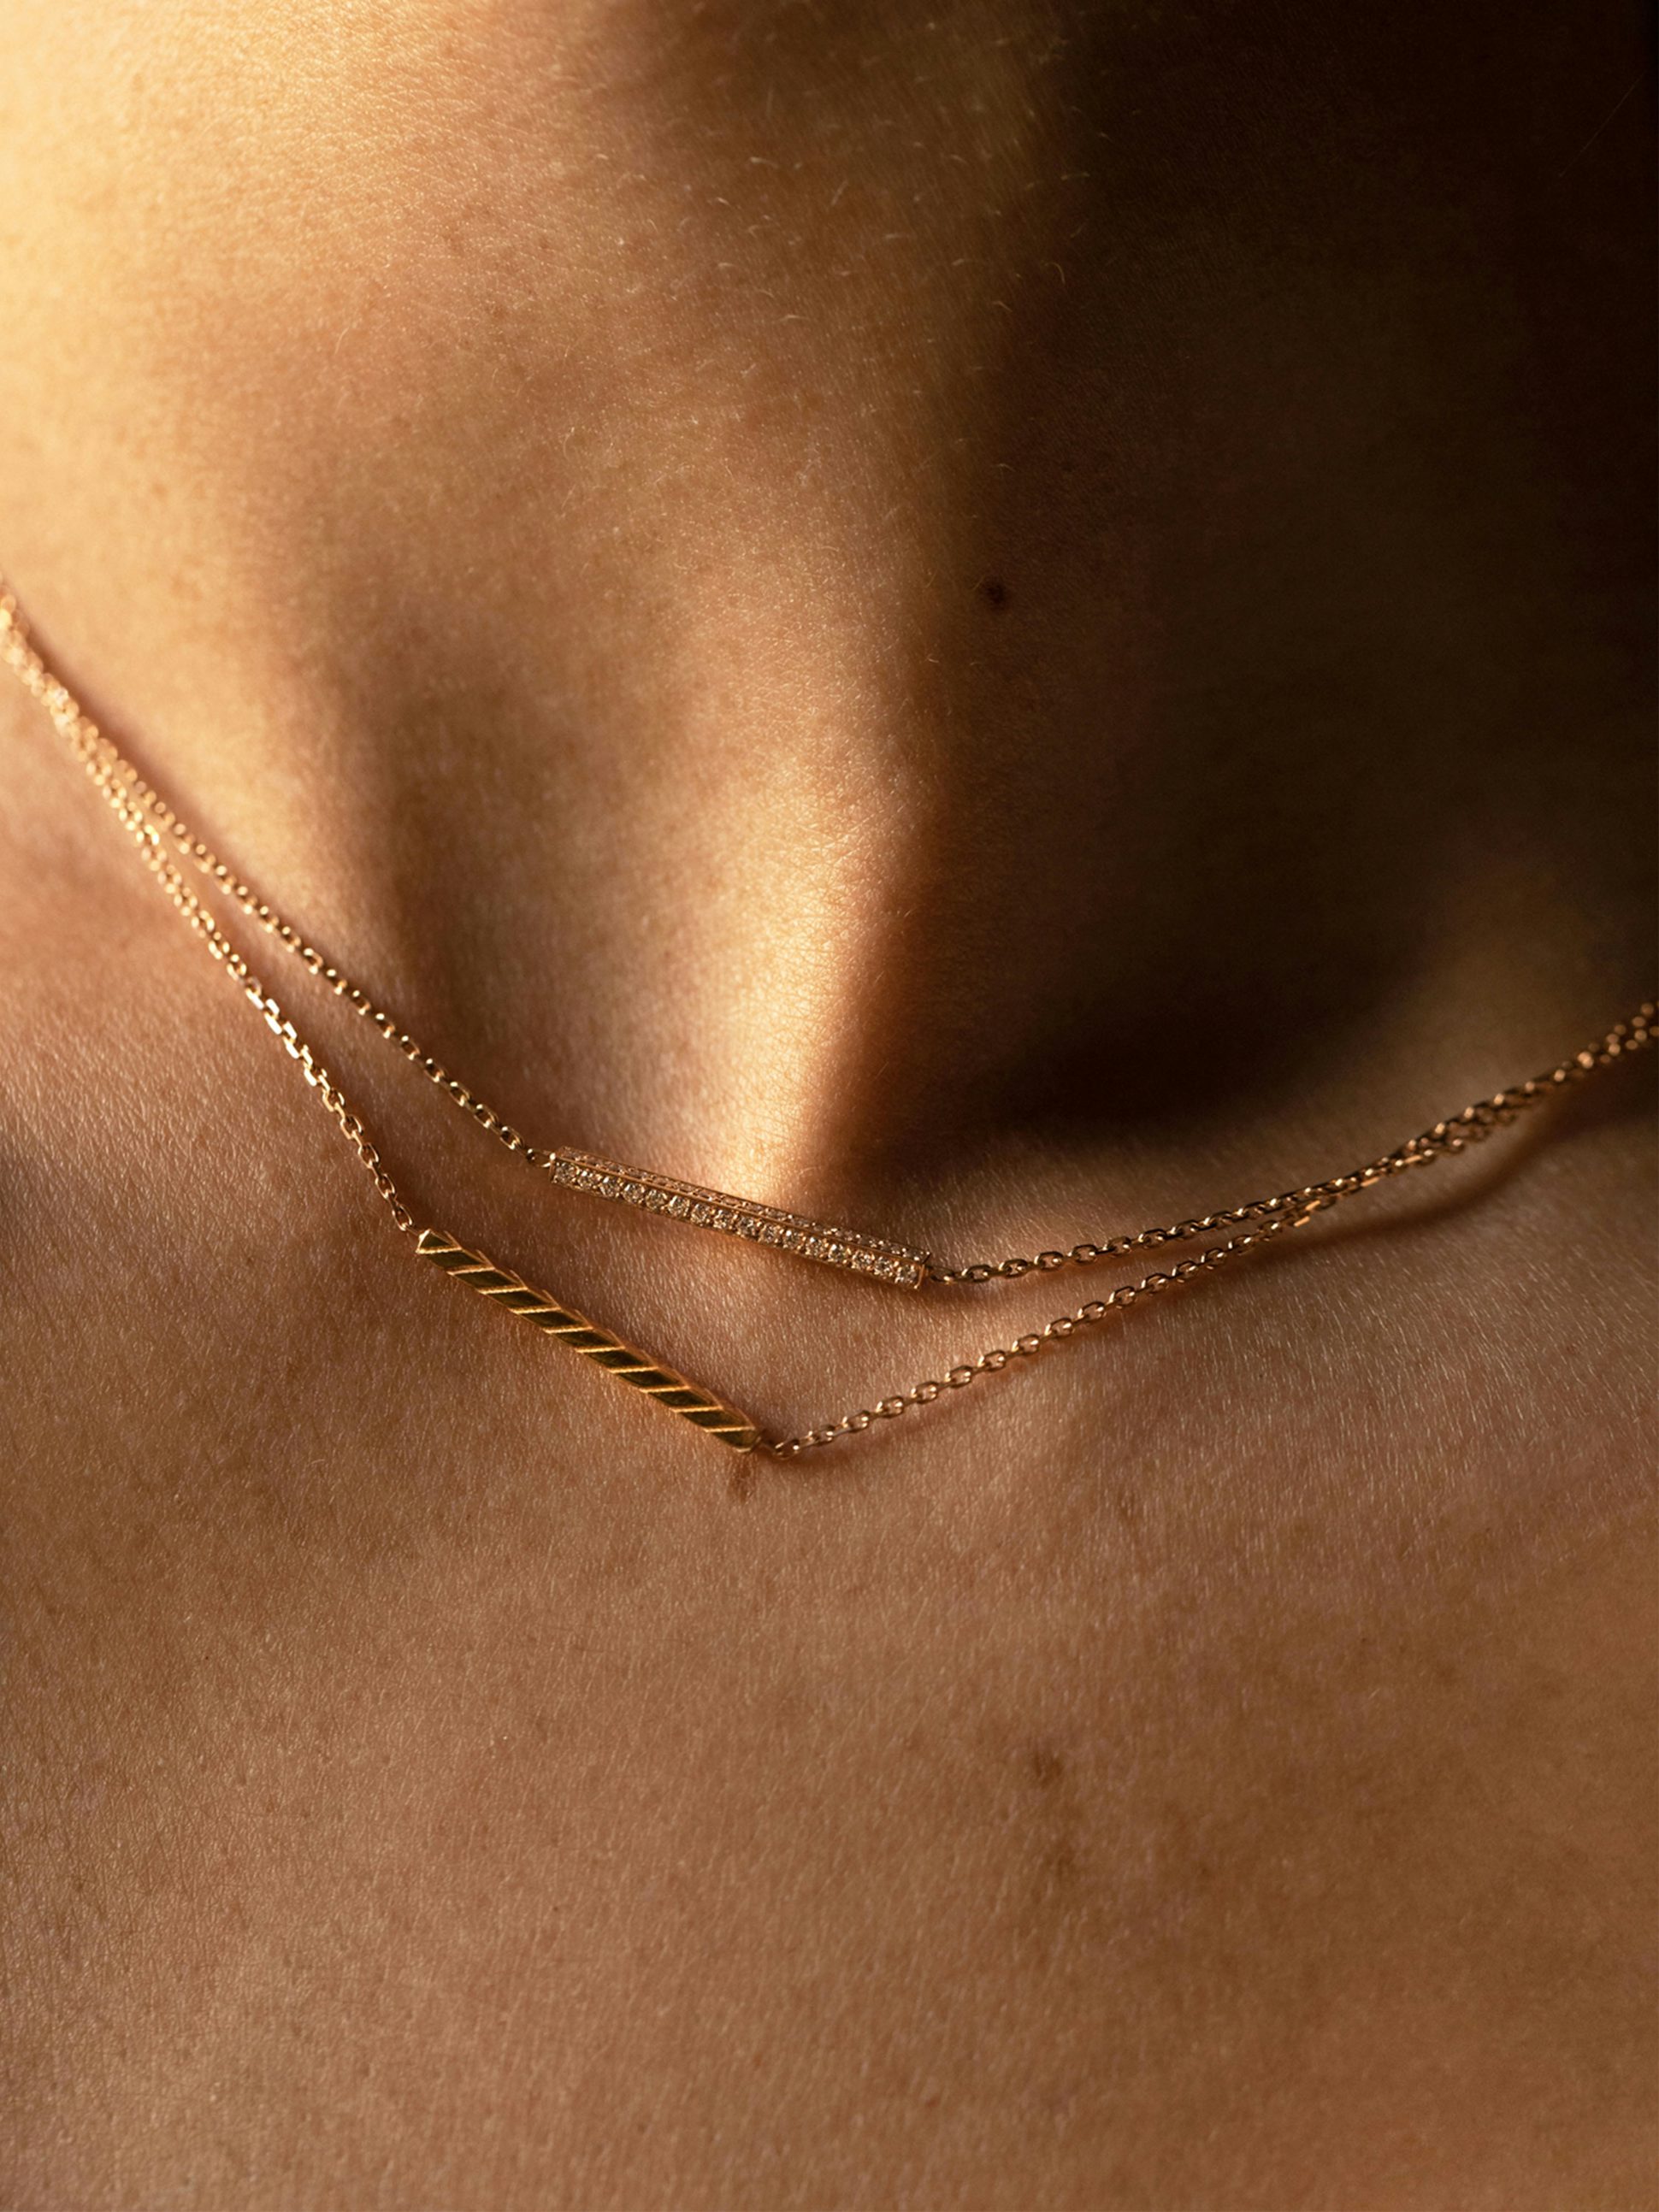 Motif Anagramme paved flat ribbon in yellow gold 18k Fairmined ethical, on 42 cm chain